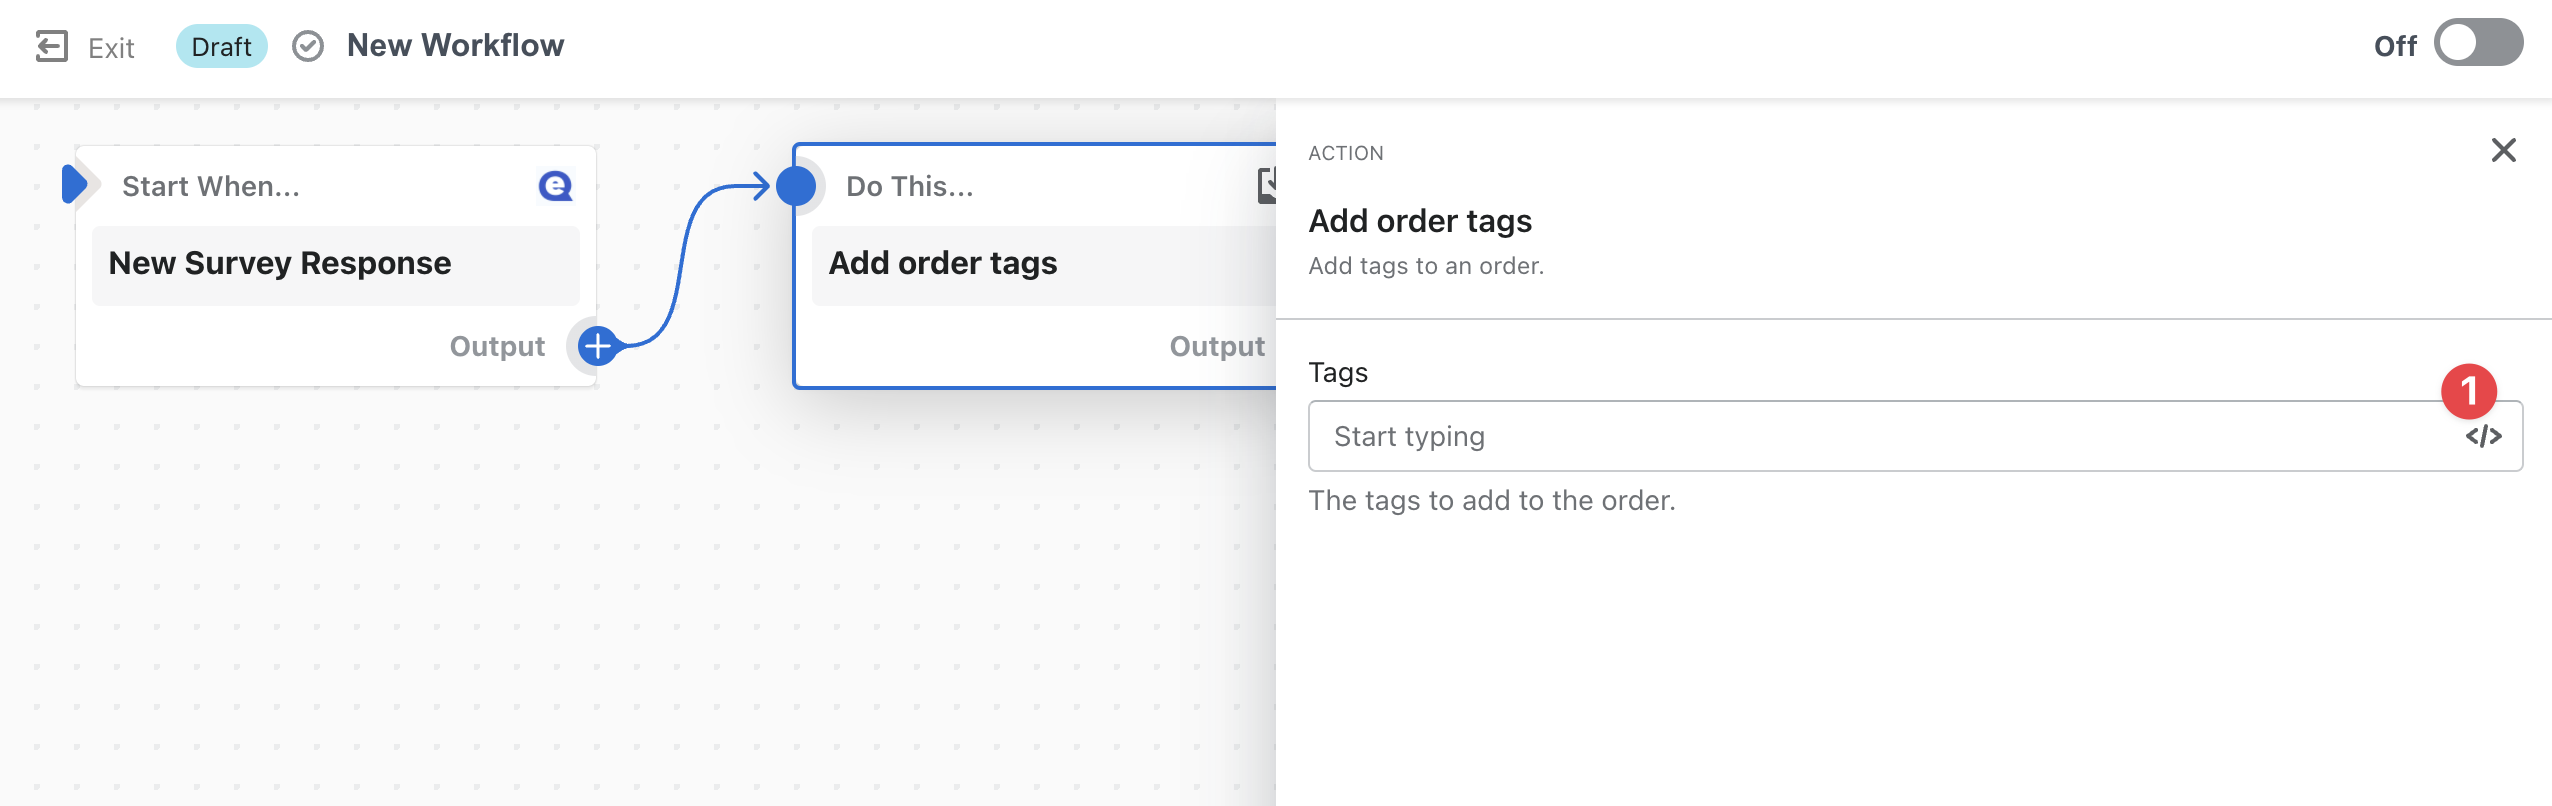 Select the template icon to see what variables you can use as tags.